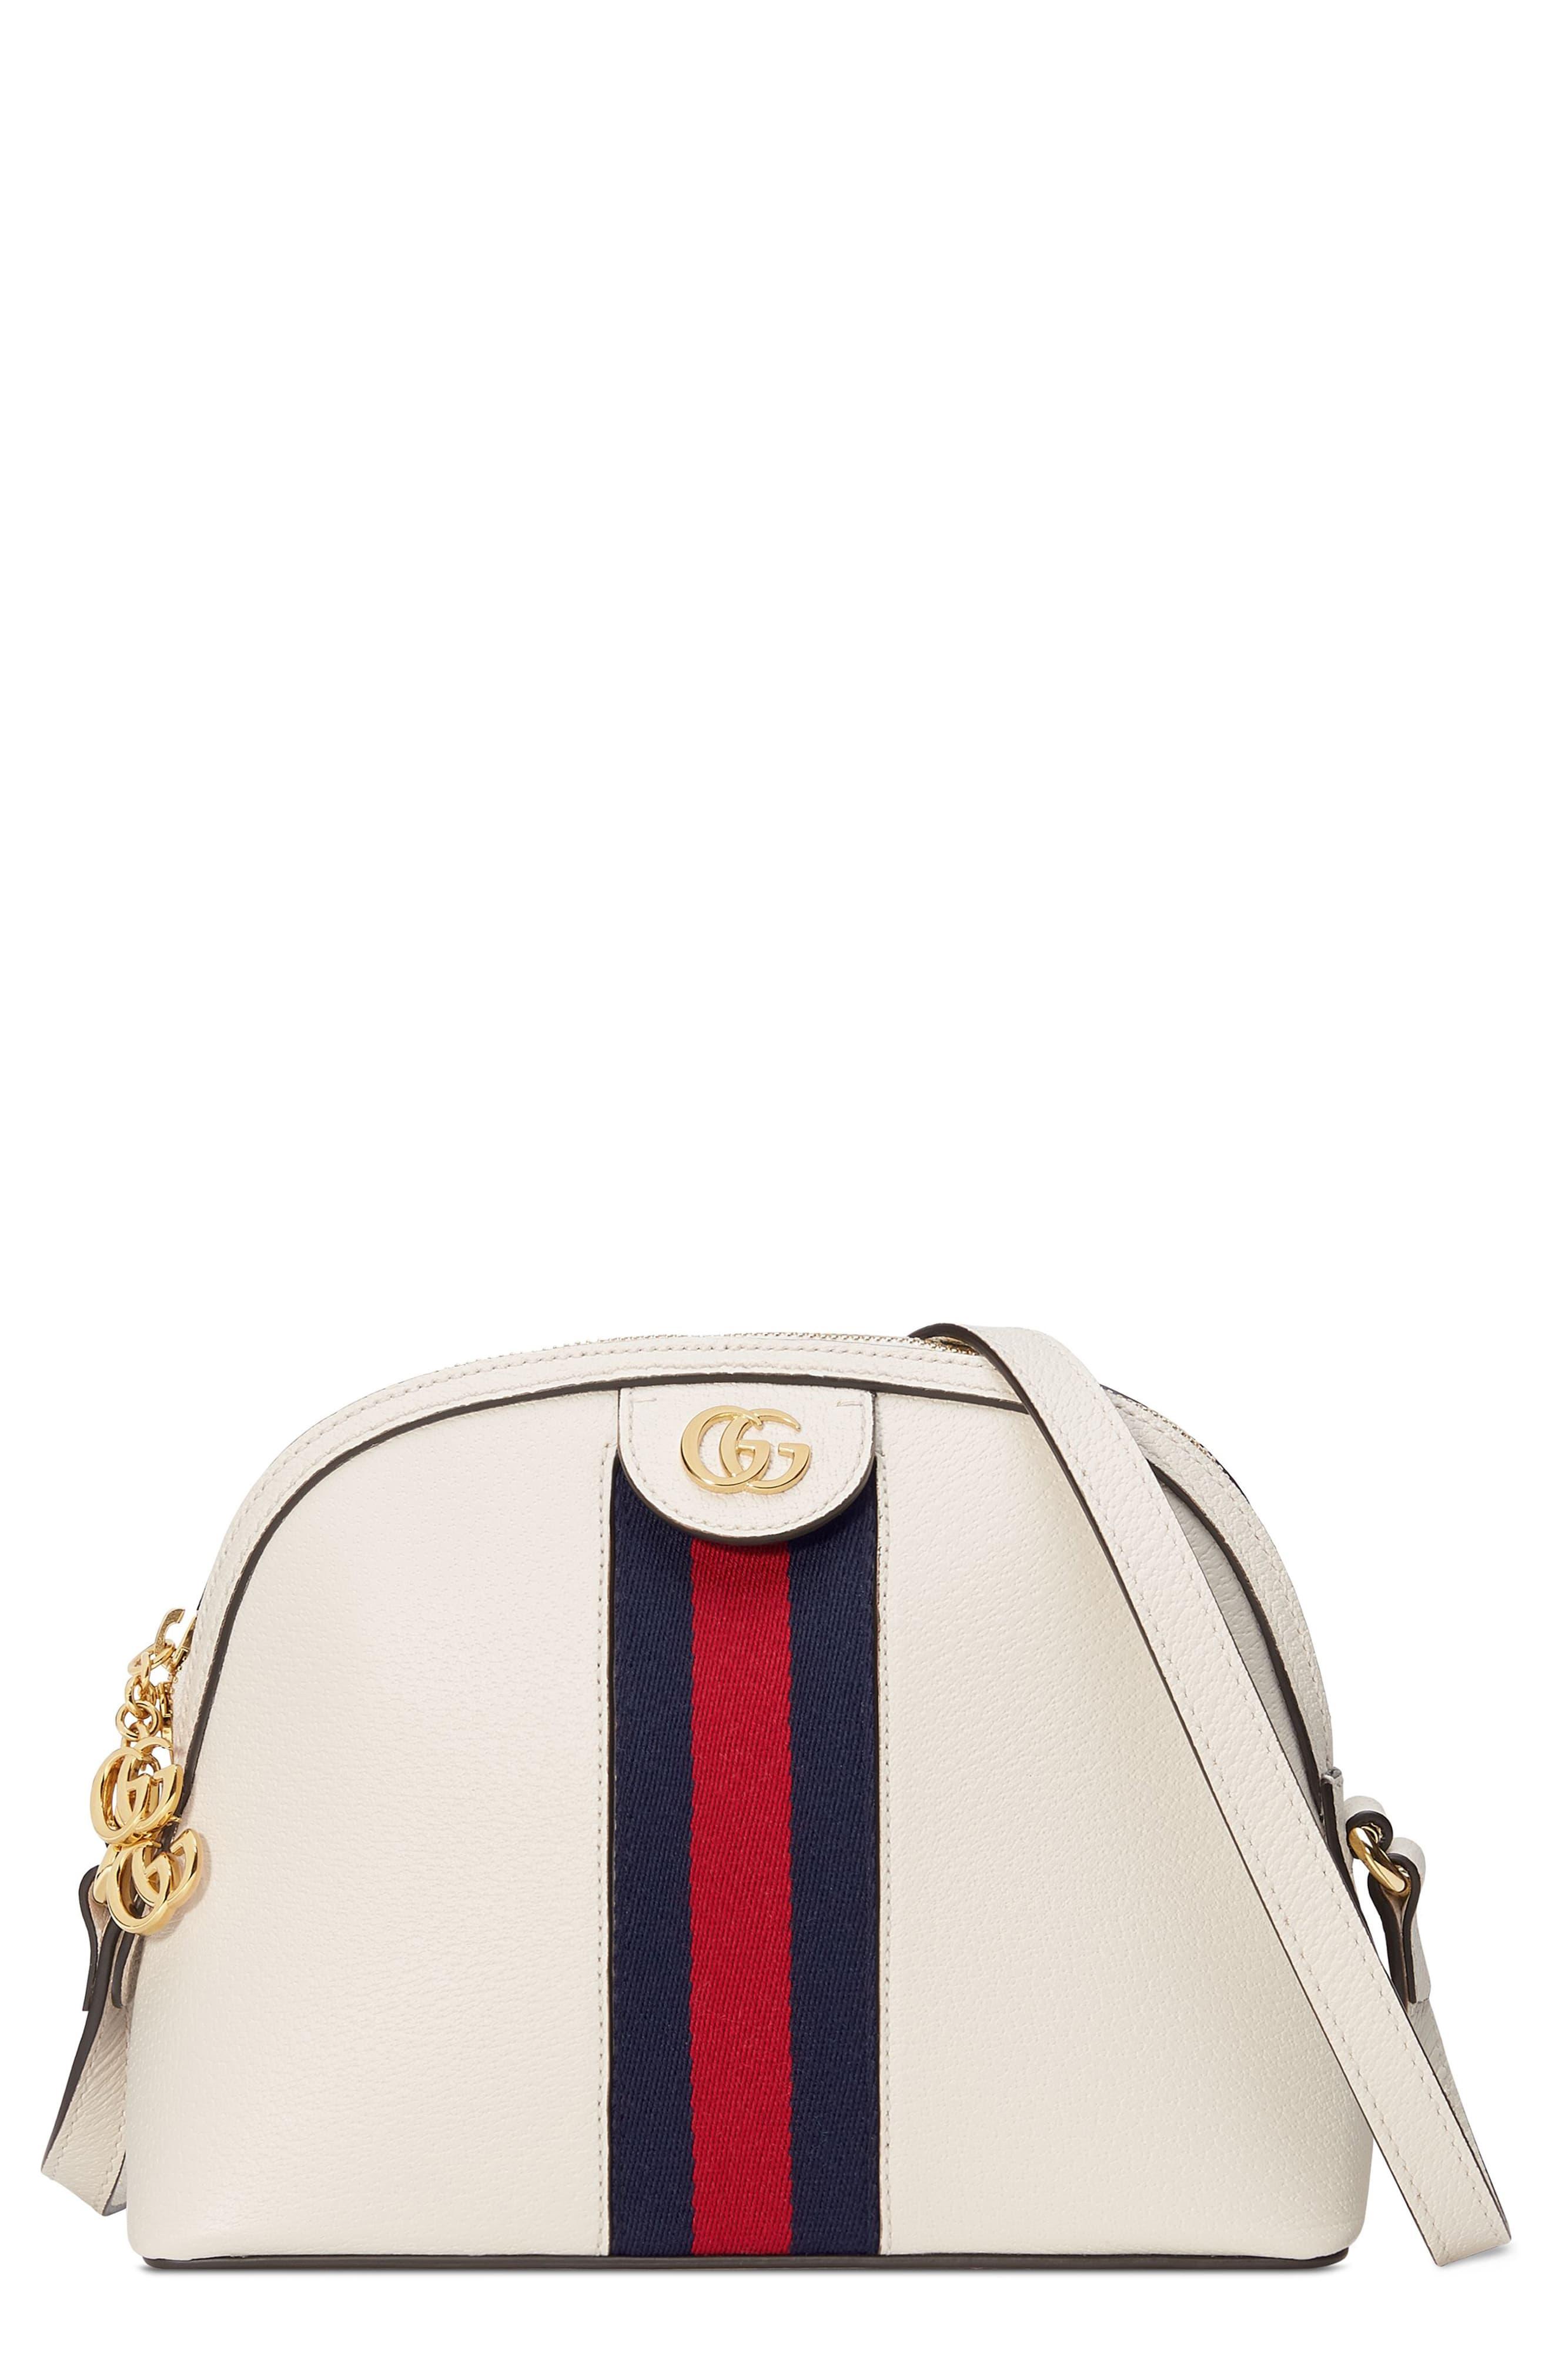 Gucci Small Ophidia Leather Shoulder Bag - Lyst